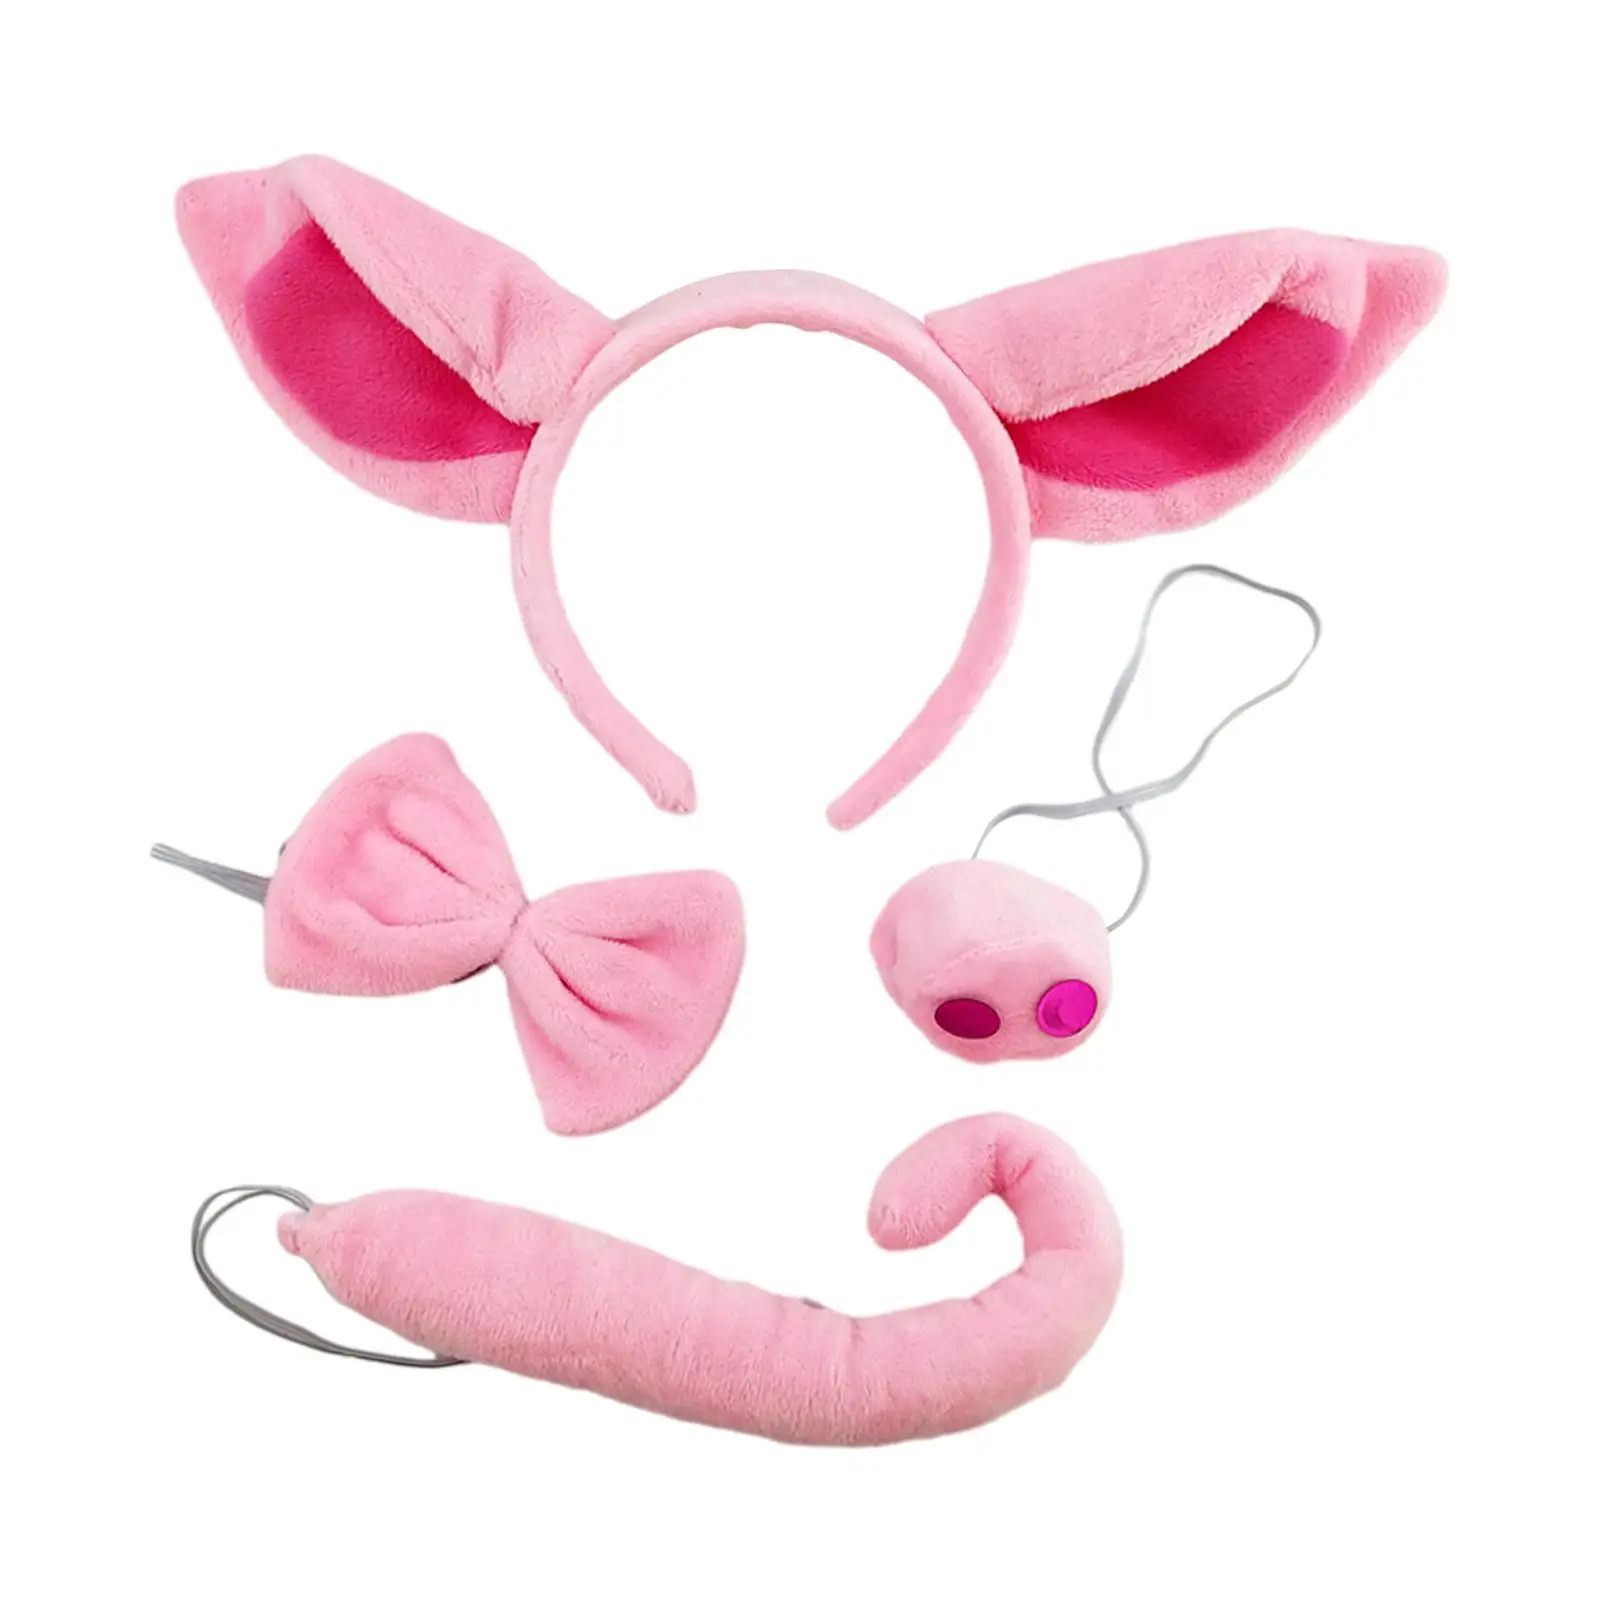 4 Pieces Animal Pig Costume Accessories Halloween Hairband Cosplay Set for Stage Shows Cosplay Carnival Performance Masquerades